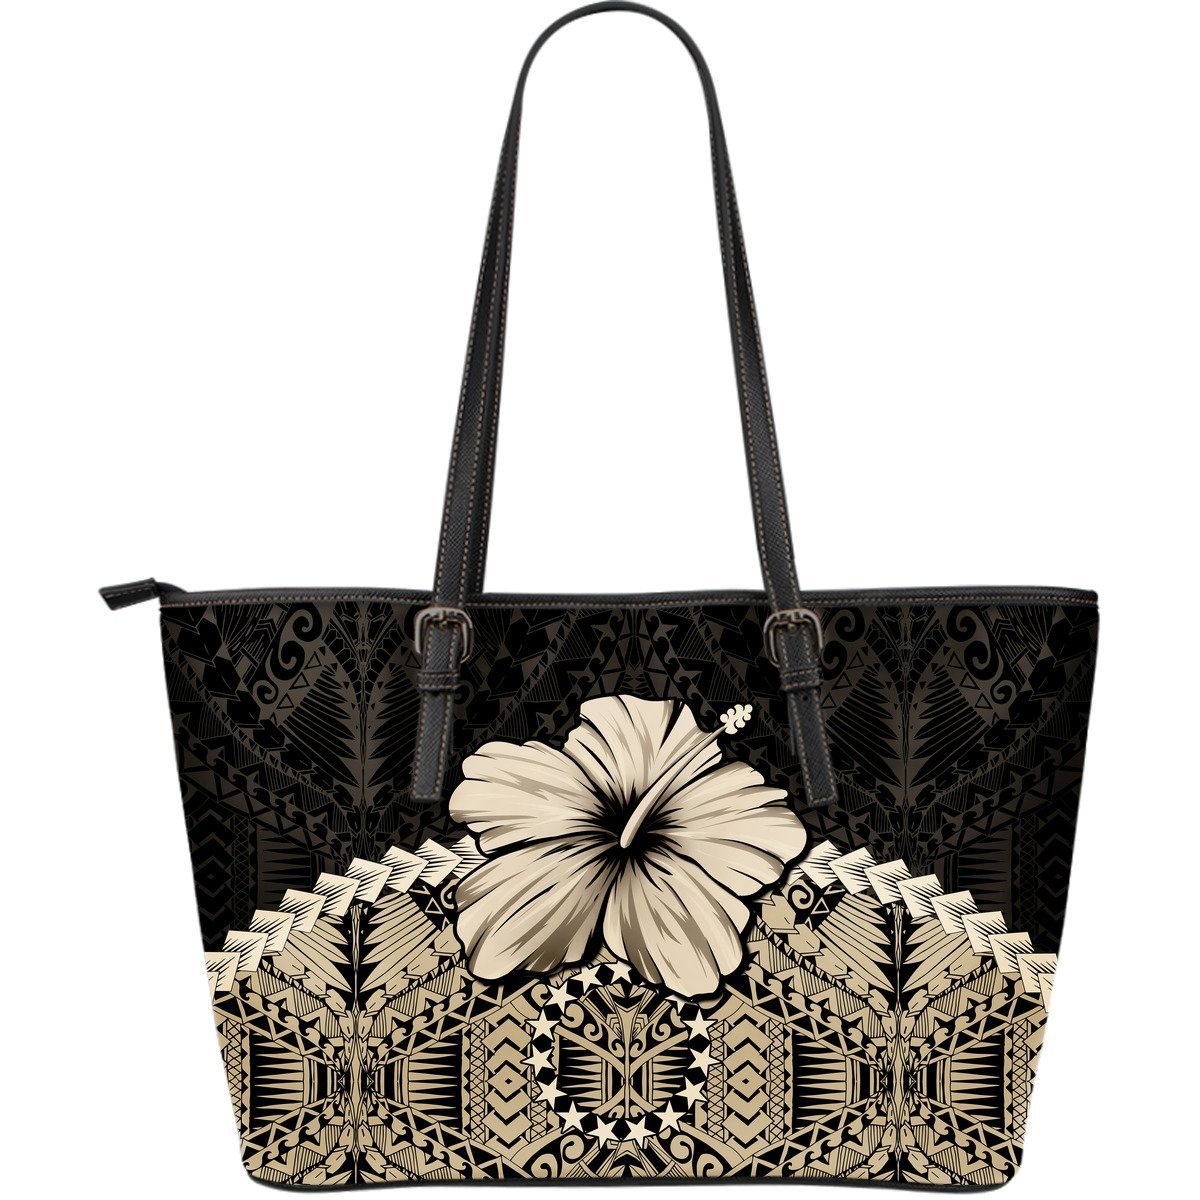 Cook Islands Leather Tote Bag - Hibiscus (Gold) Gold - Polynesian Pride